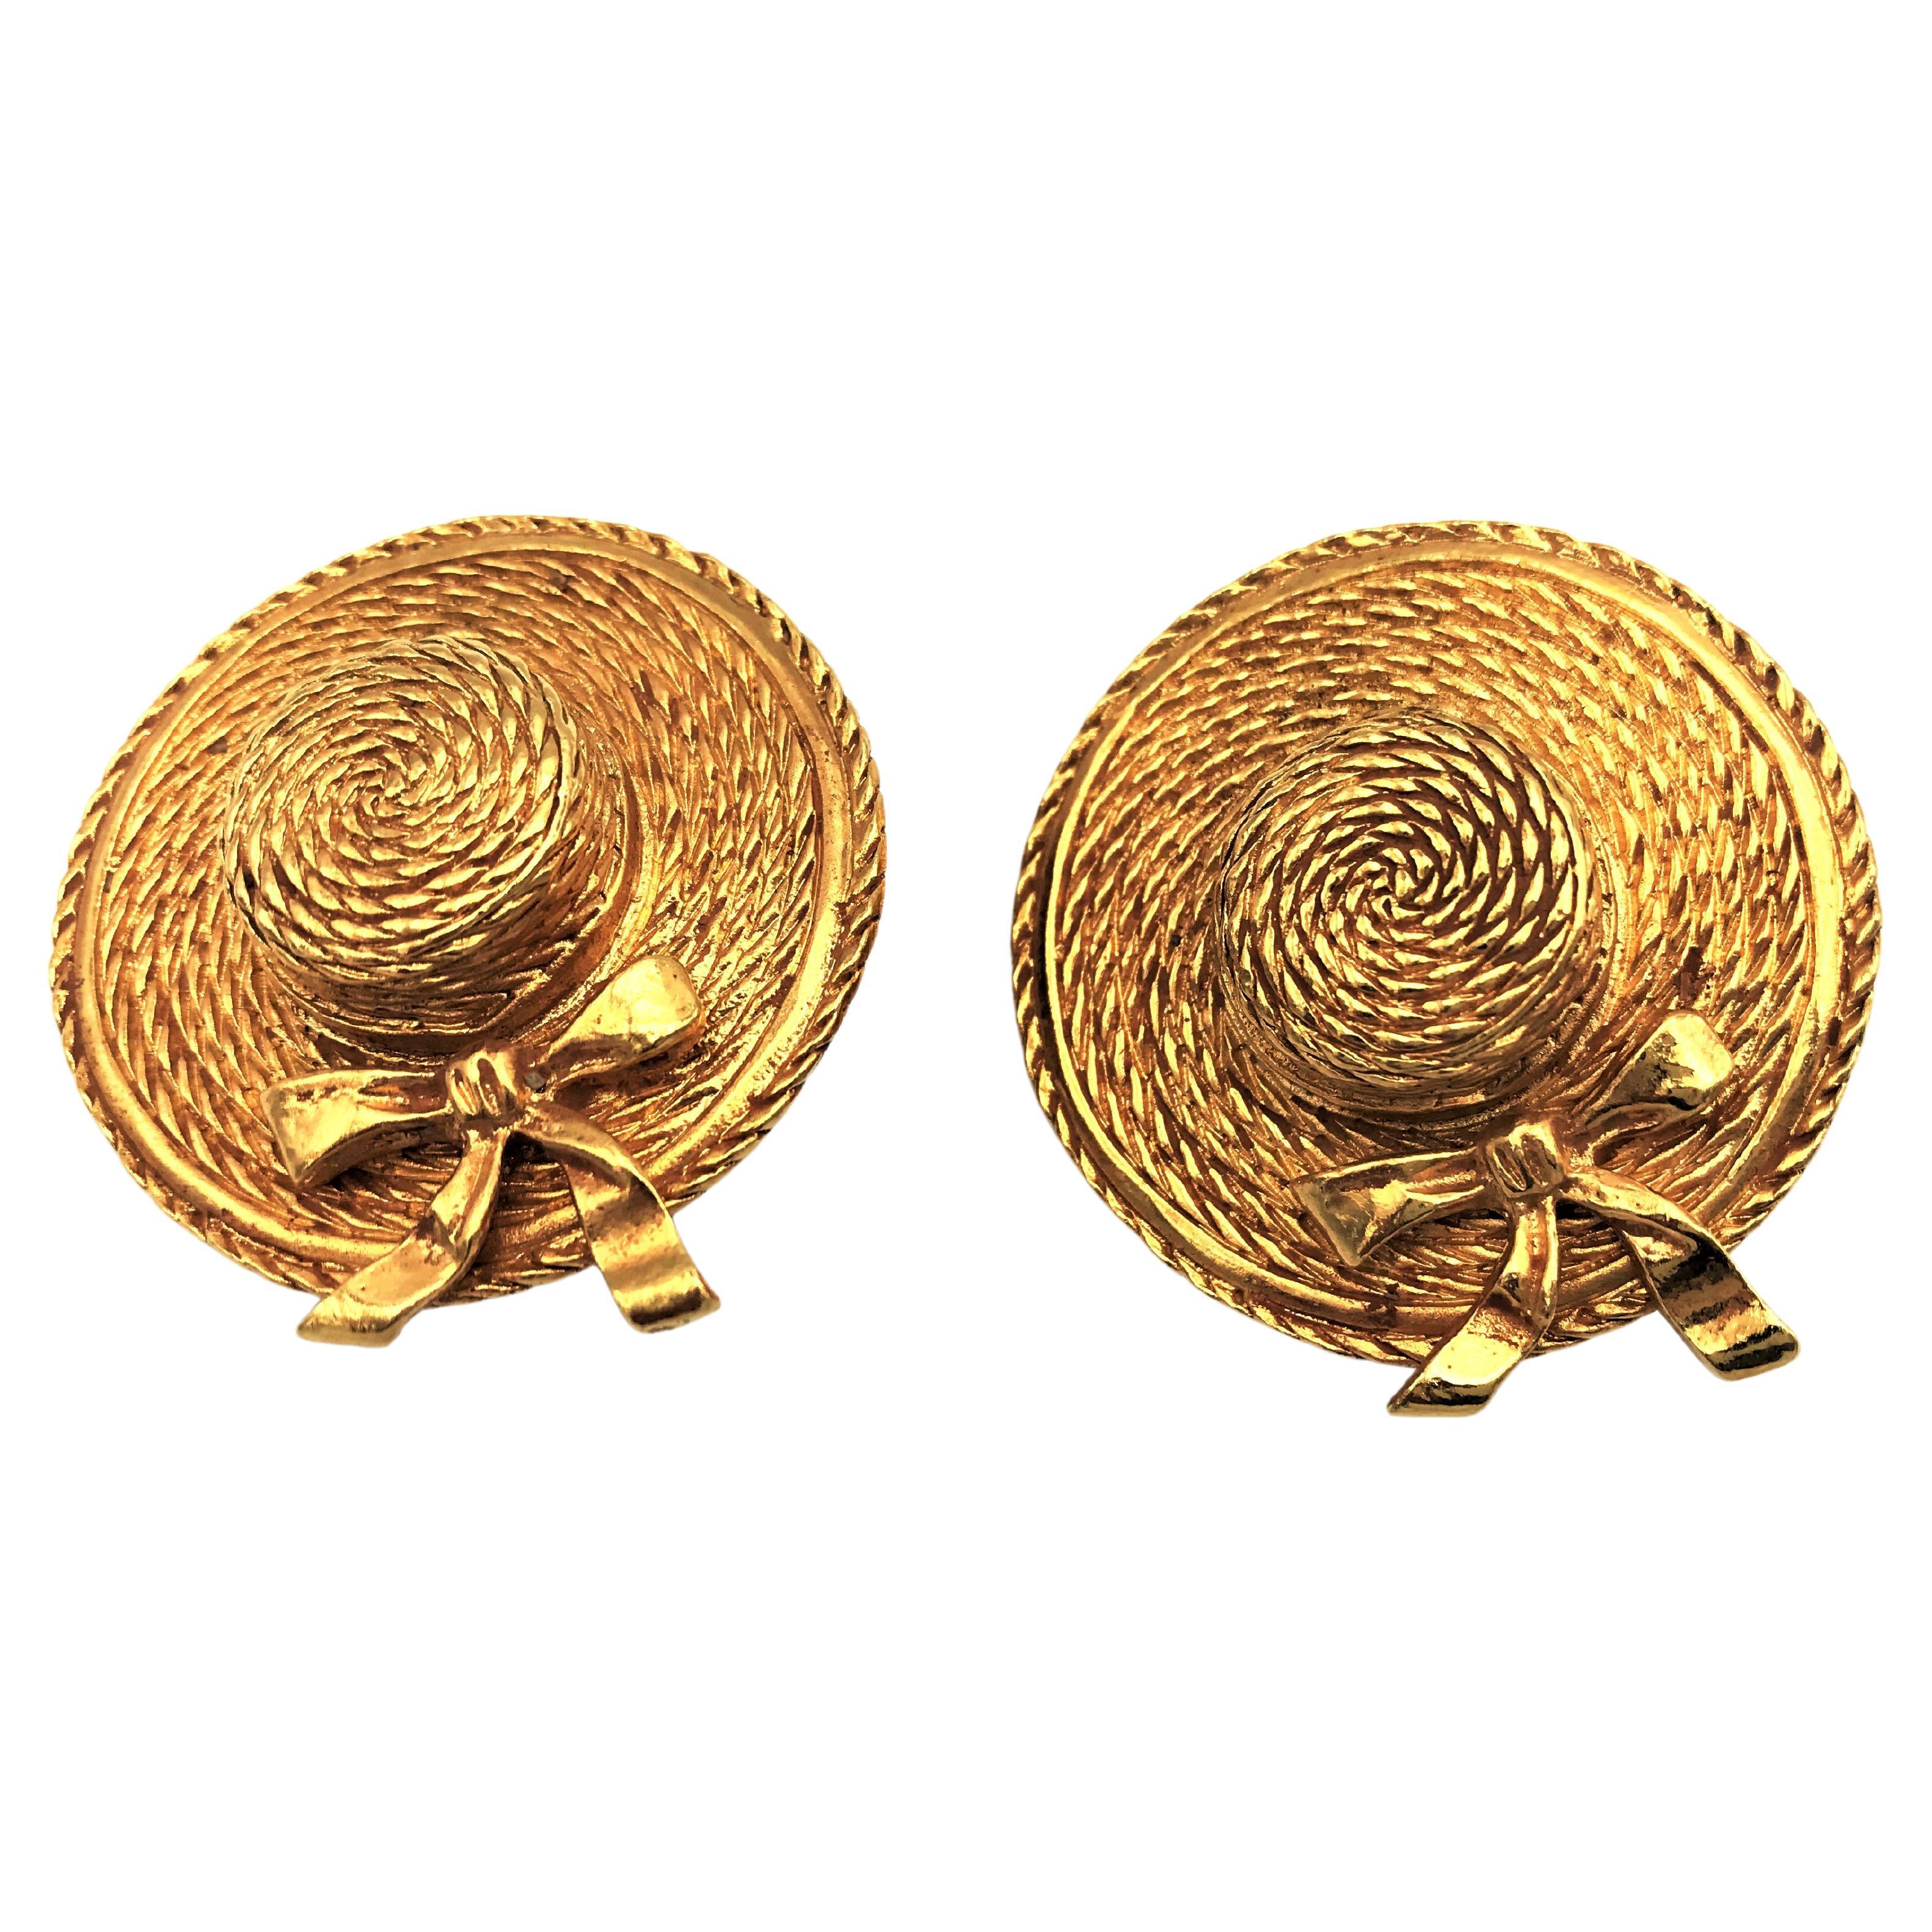 These early Chanel clip-on earrings are in the shape of a straw hat with a ribbon and bow, signed 1970/80 in 24 karat gold plated. Coco Chanel loved hats!
Measurement: The hat clip has a diameter of 4 cm, the head height is 0,7 cm. Very good